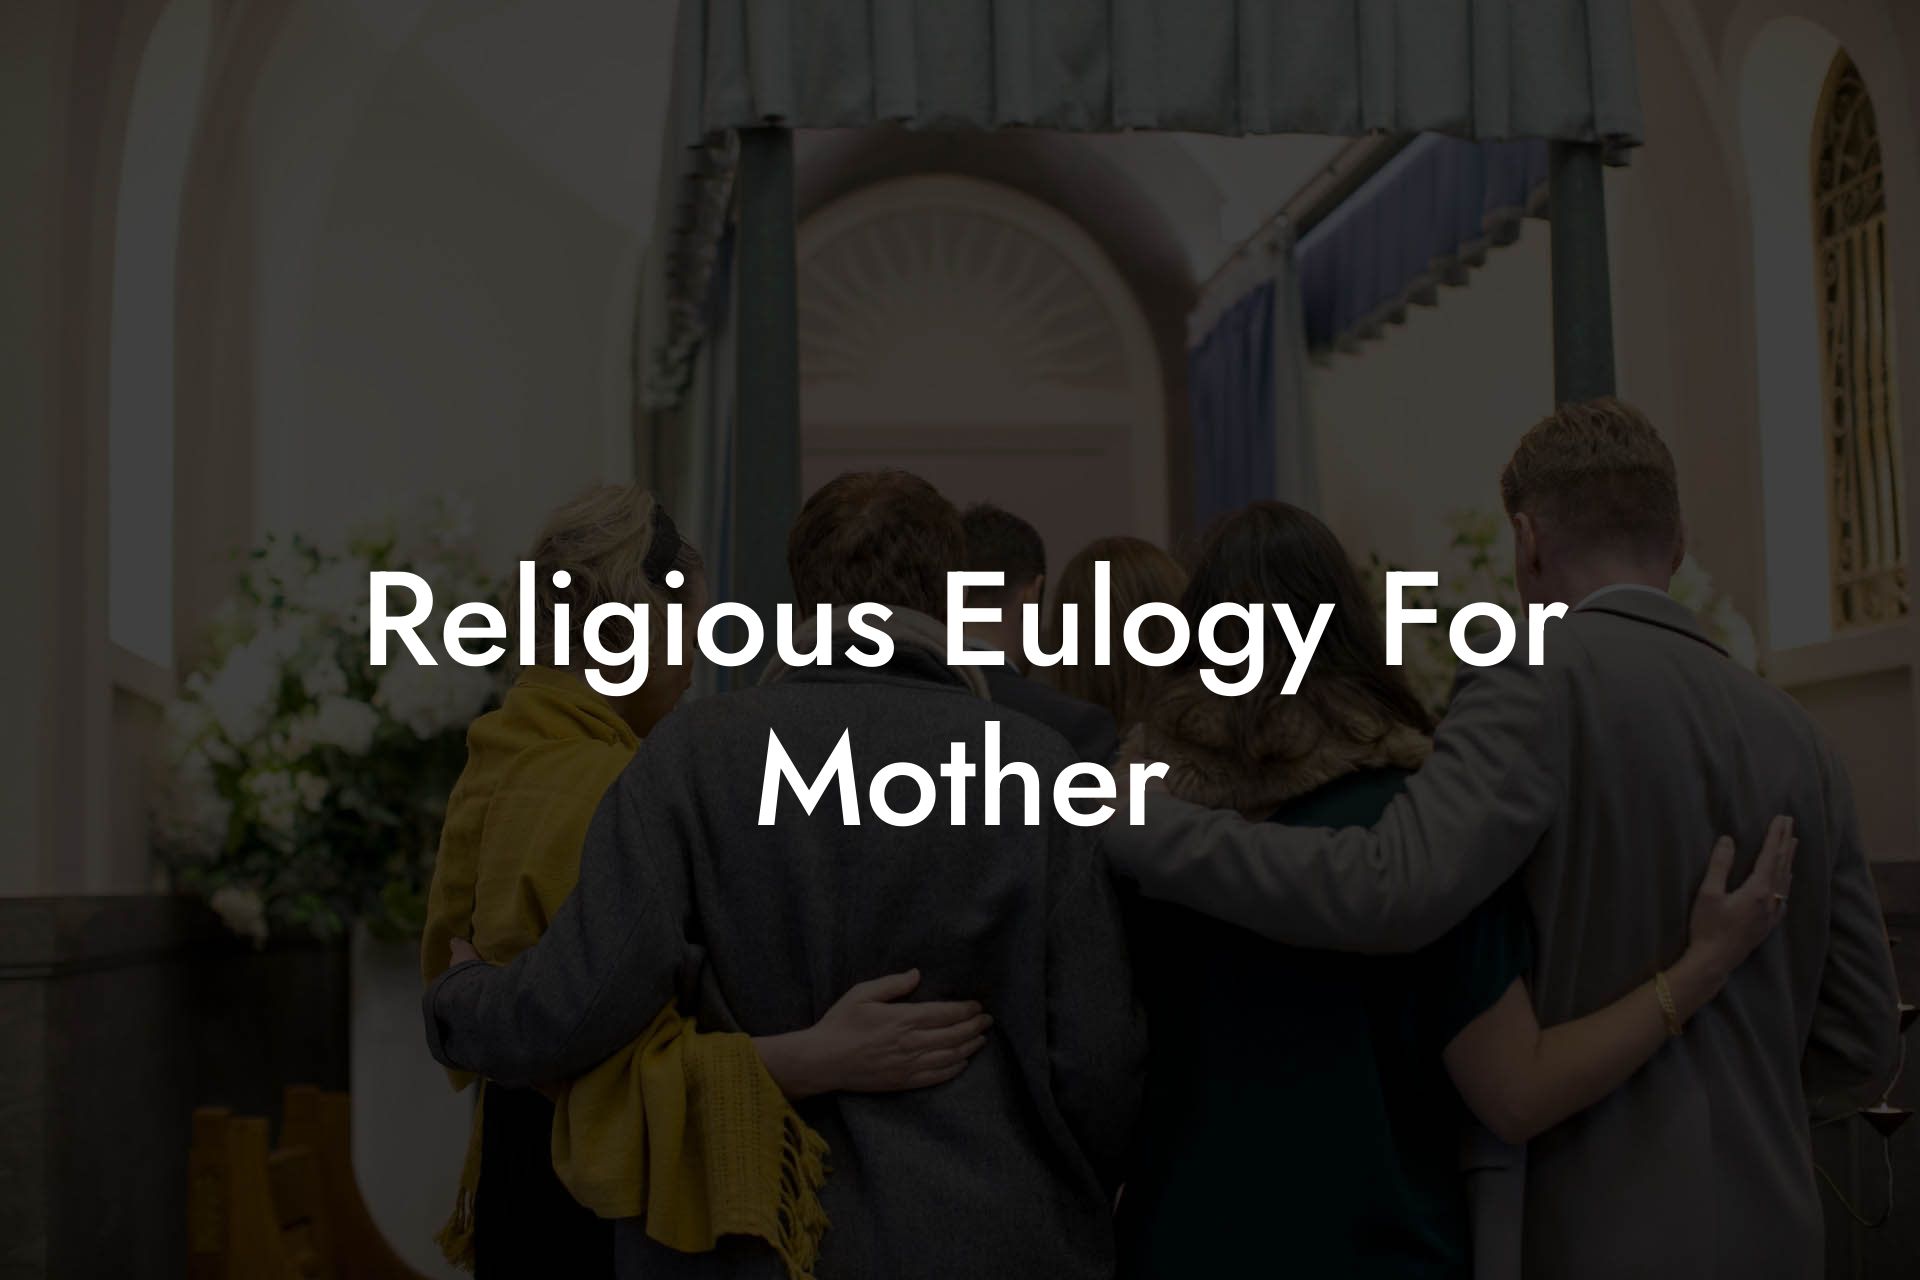 Religious Eulogy For Mother